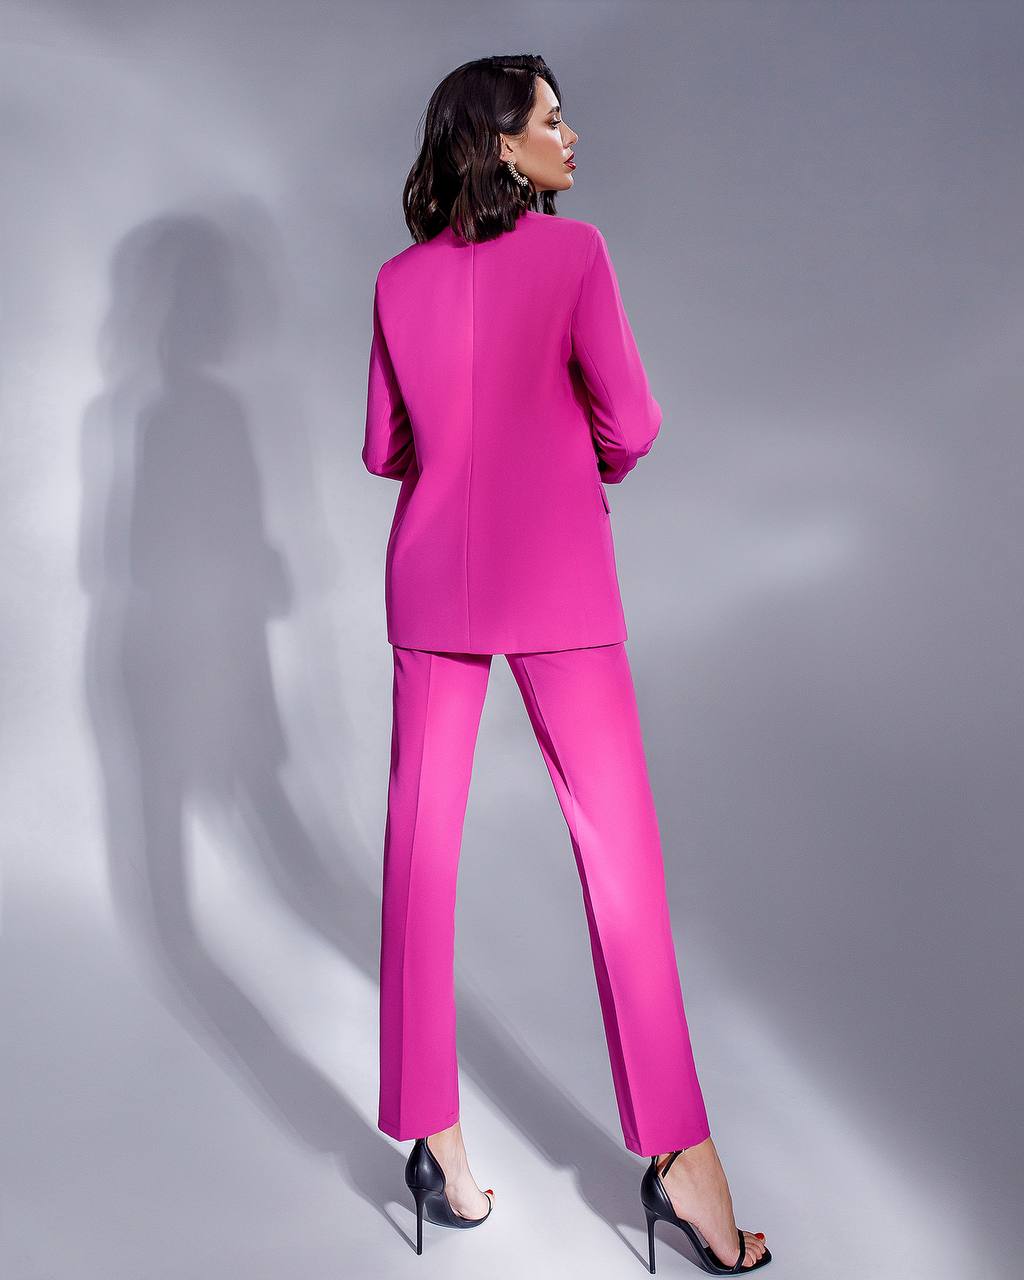 a woman in a pink suit and heels